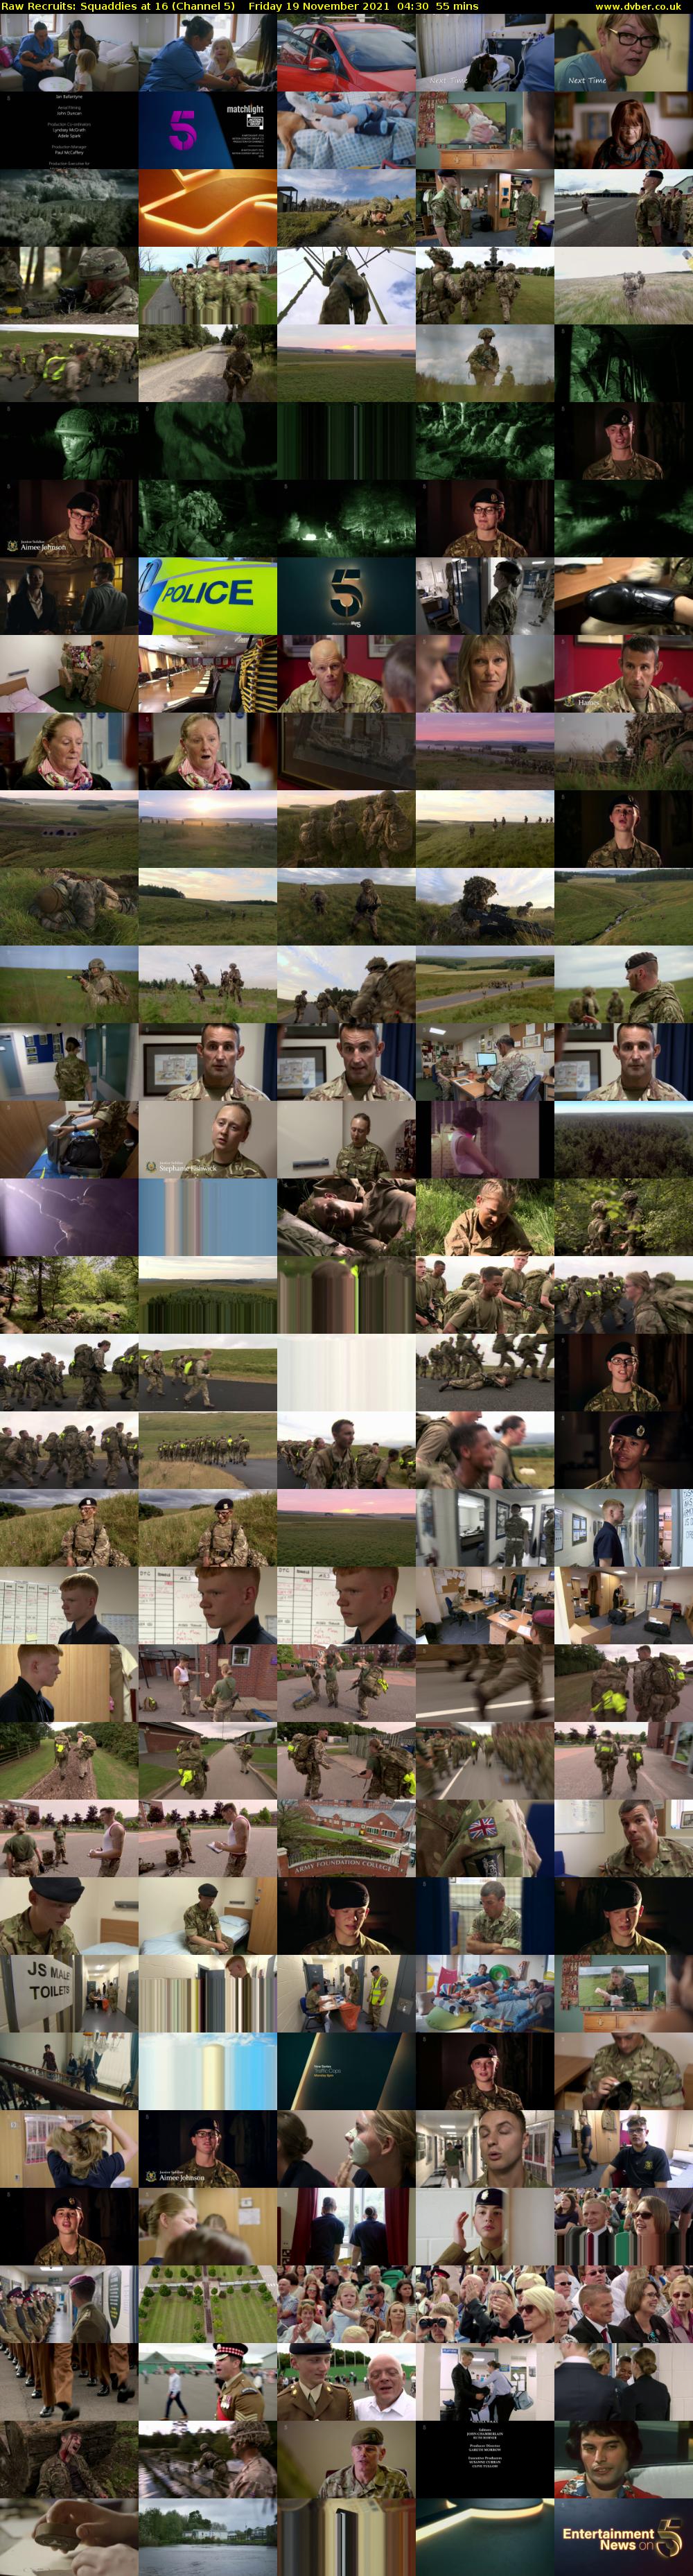 Raw Recruits: Squaddies at 16 (Channel 5) Friday 19 November 2021 04:30 - 05:25